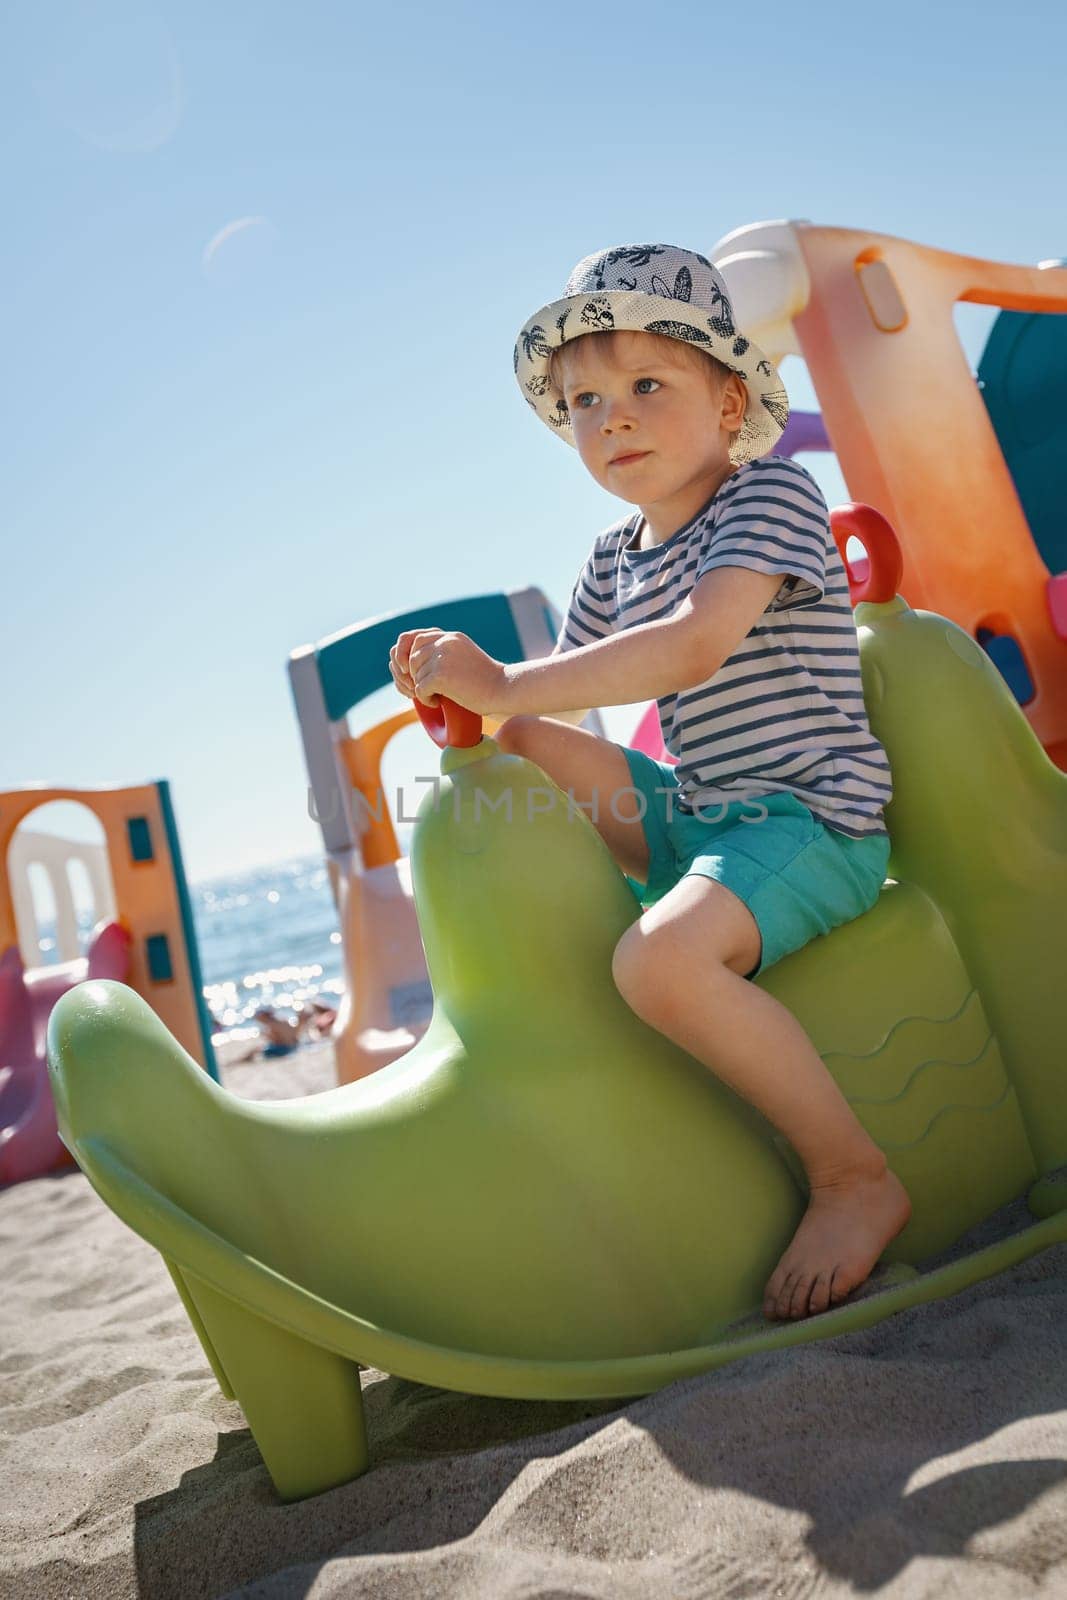 A little boy poses on a green plastic toy at a beach playground. Sand, sea and light blue sky in the background. by Lincikas